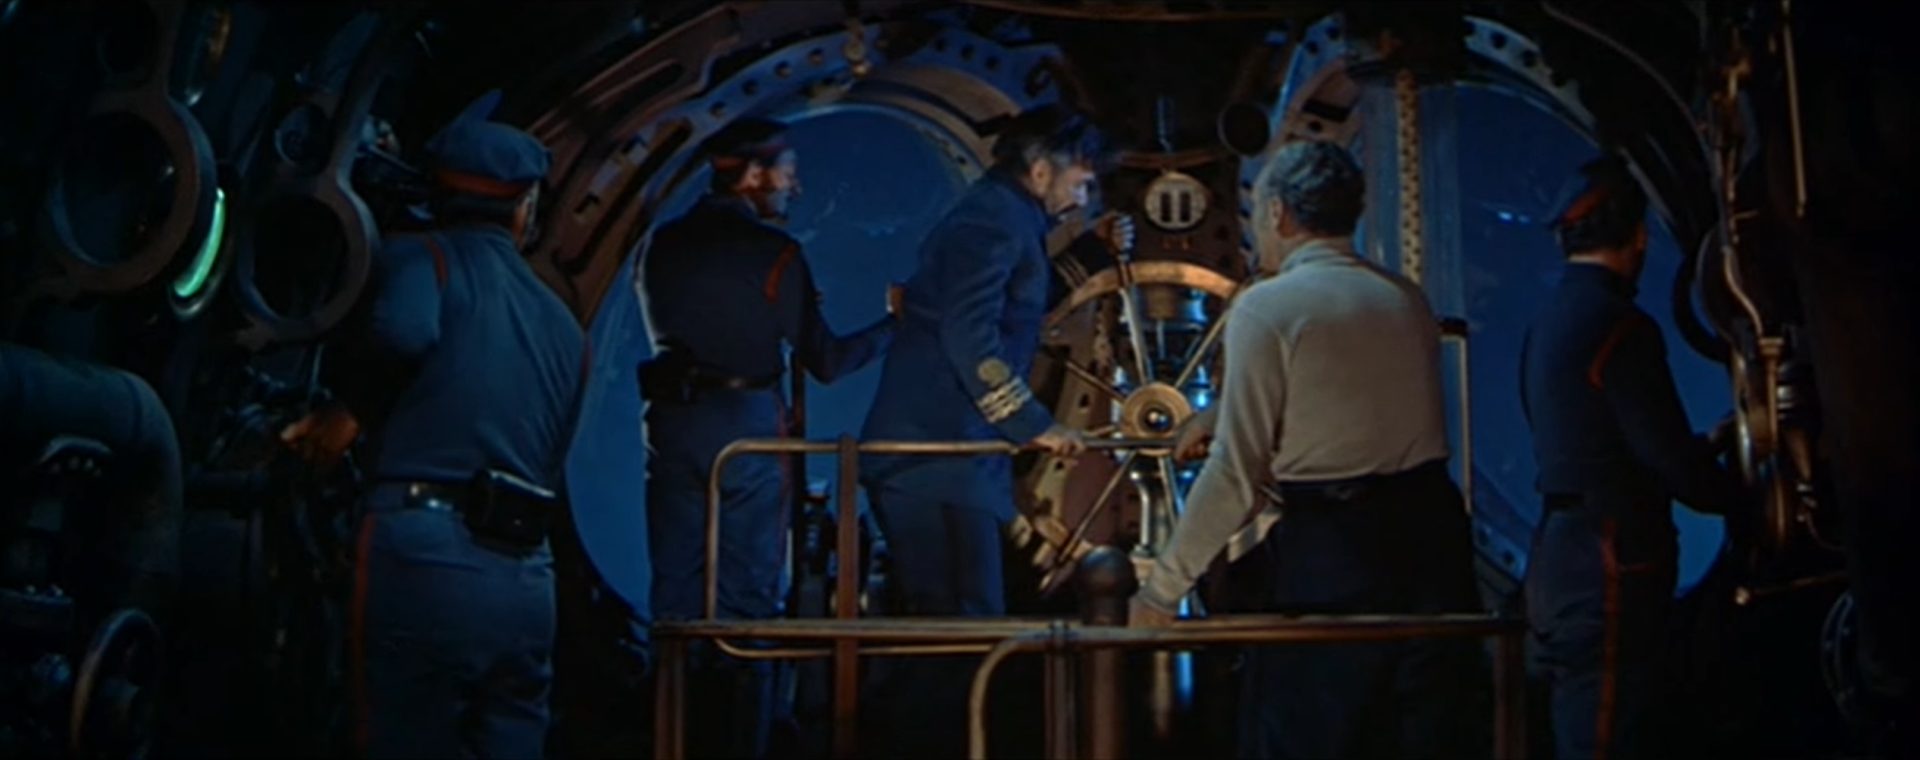 Technicolor scene with Captain Nemo on the bridge at the helm of the submerged Nautilus with some crew members present.